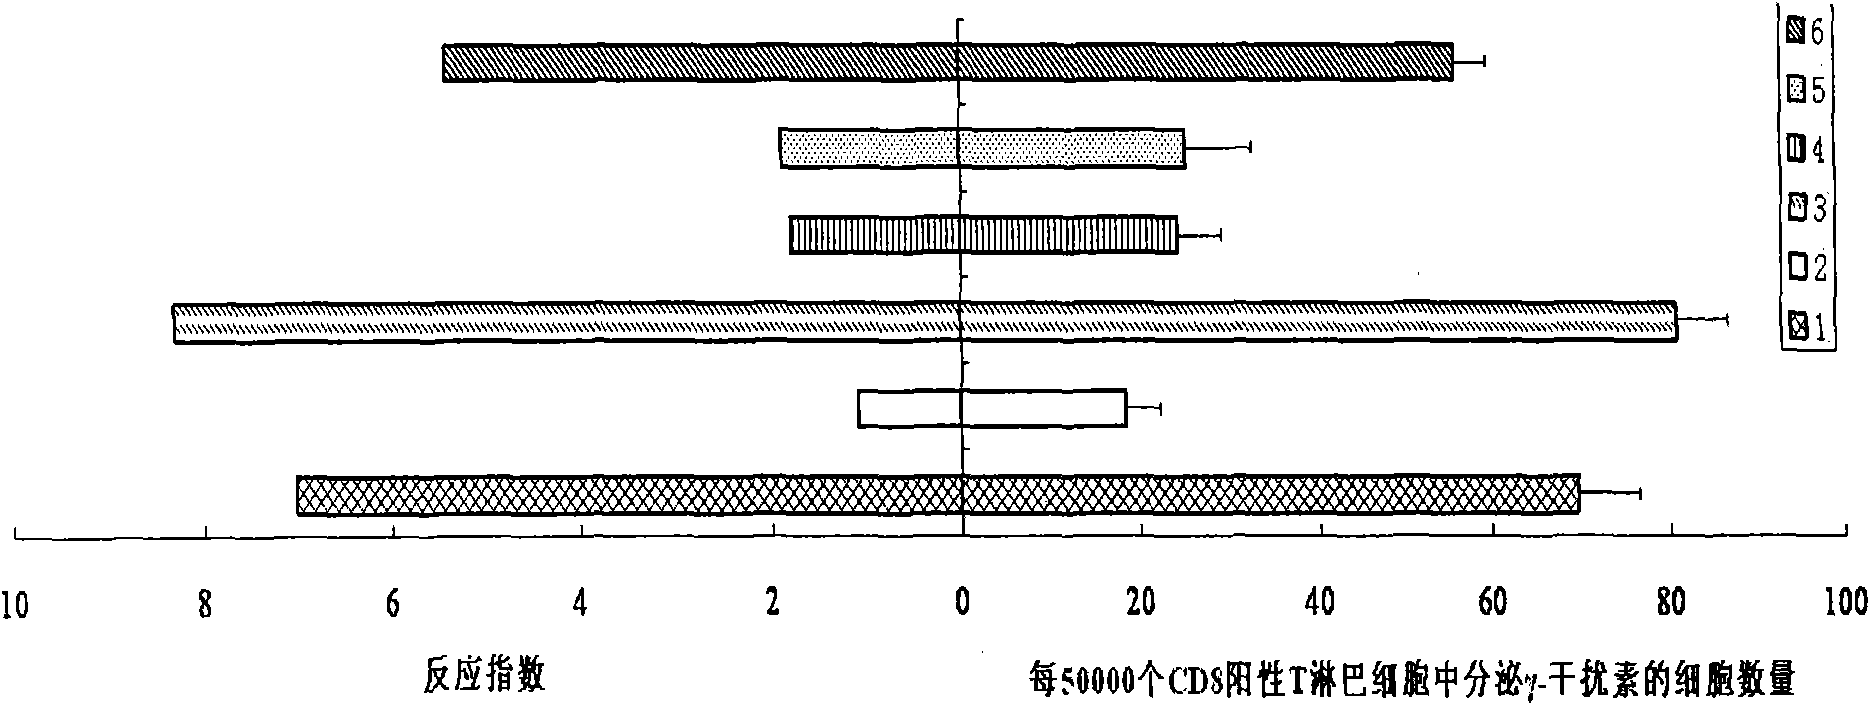 HLA-A2 restrictive epitope polypeptide of LMP2A protein source and purpose thereof